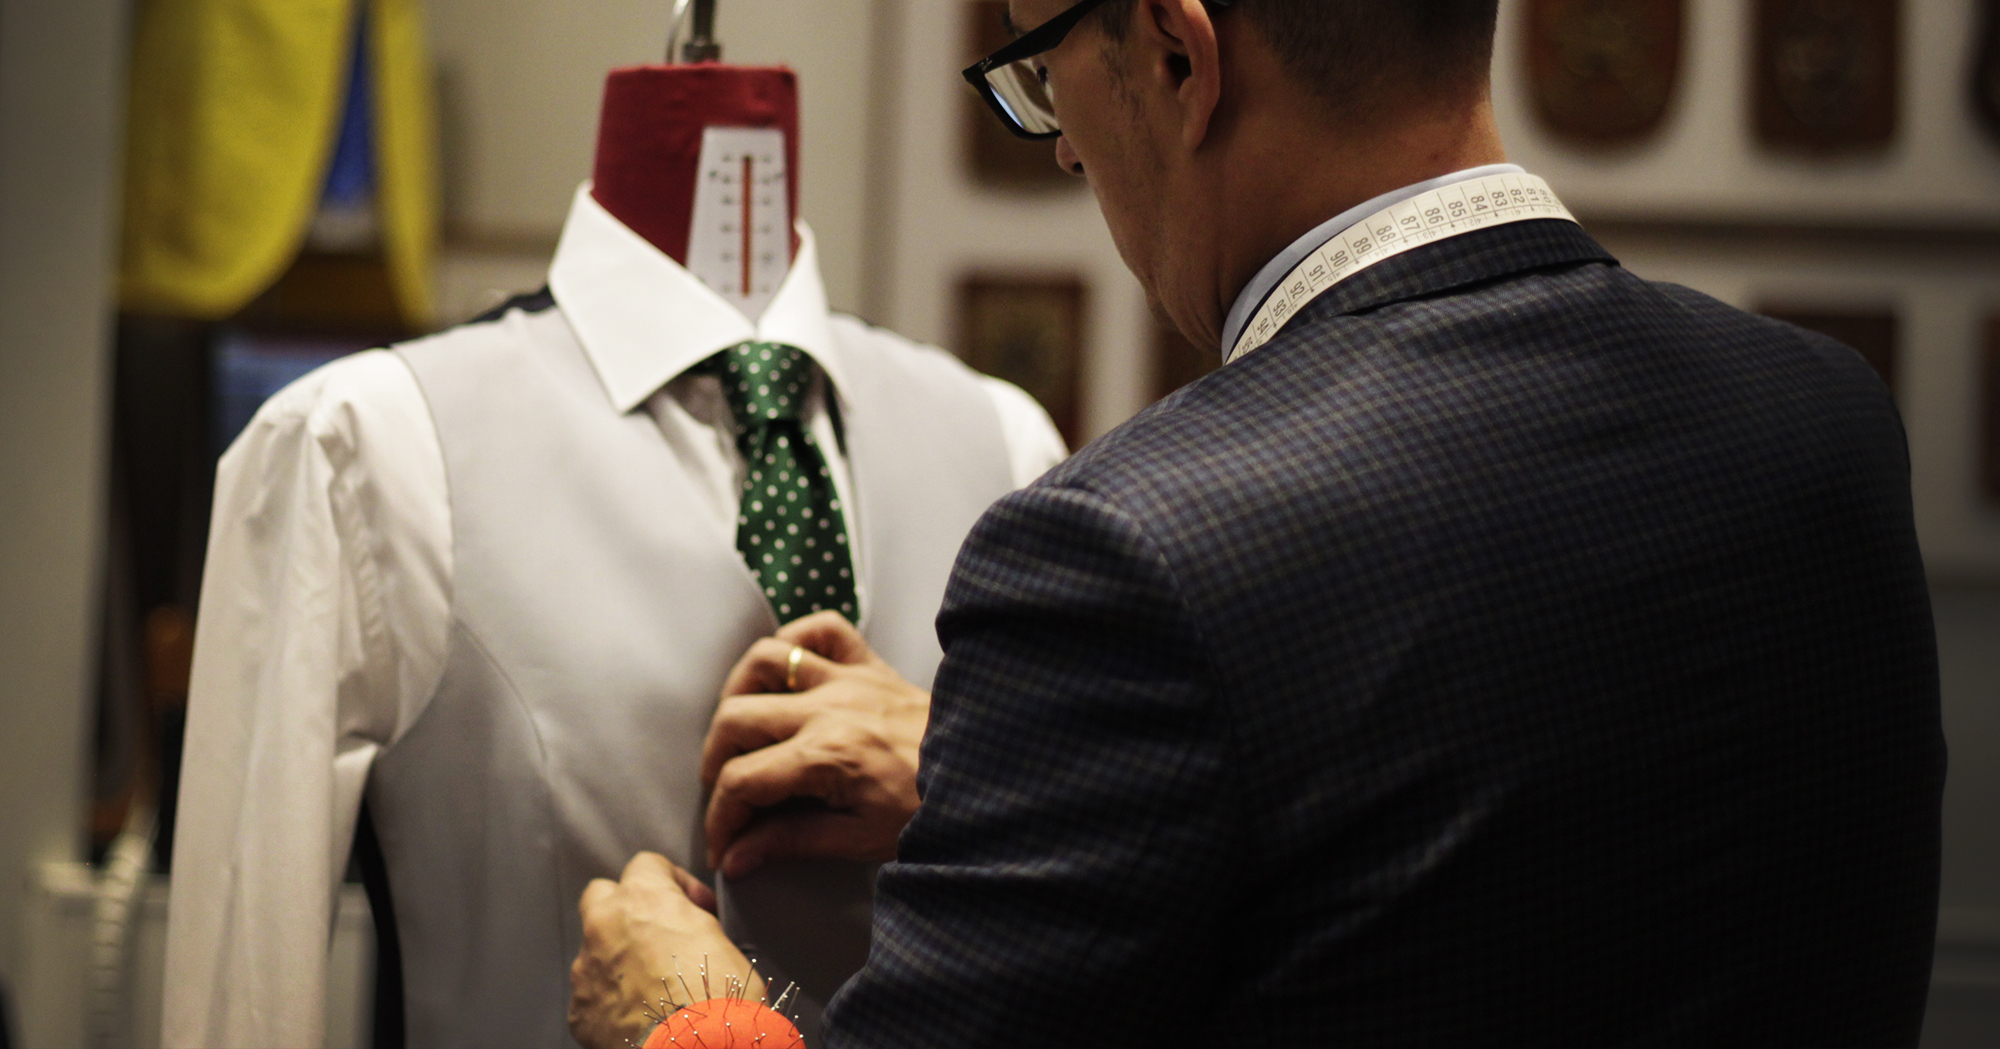 How to pick your perfect wedding suit? – Tips